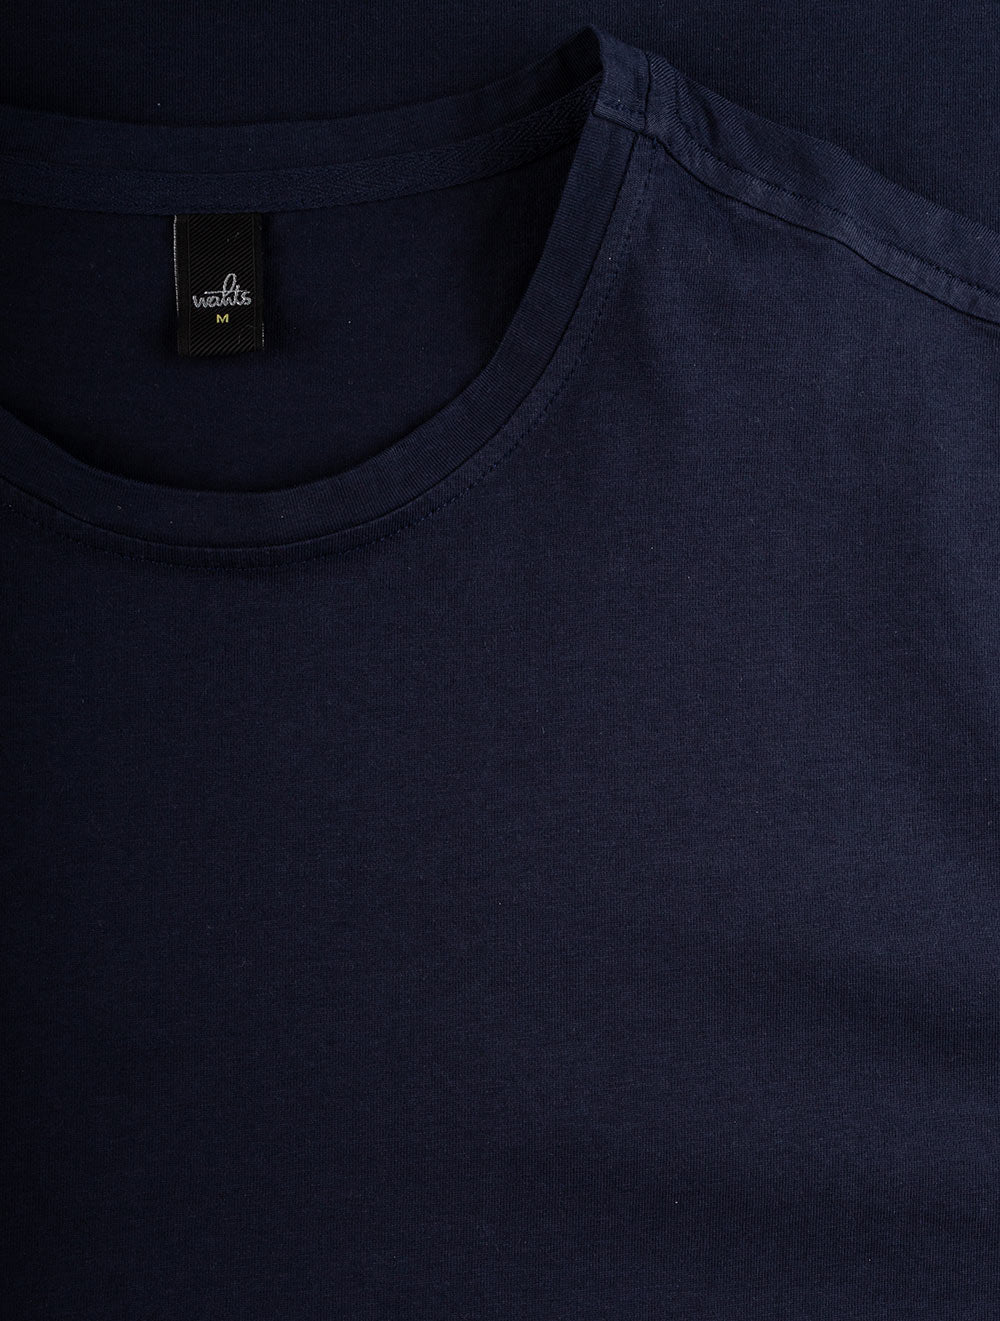 WAHTS Navy Crew Neck T-shirt